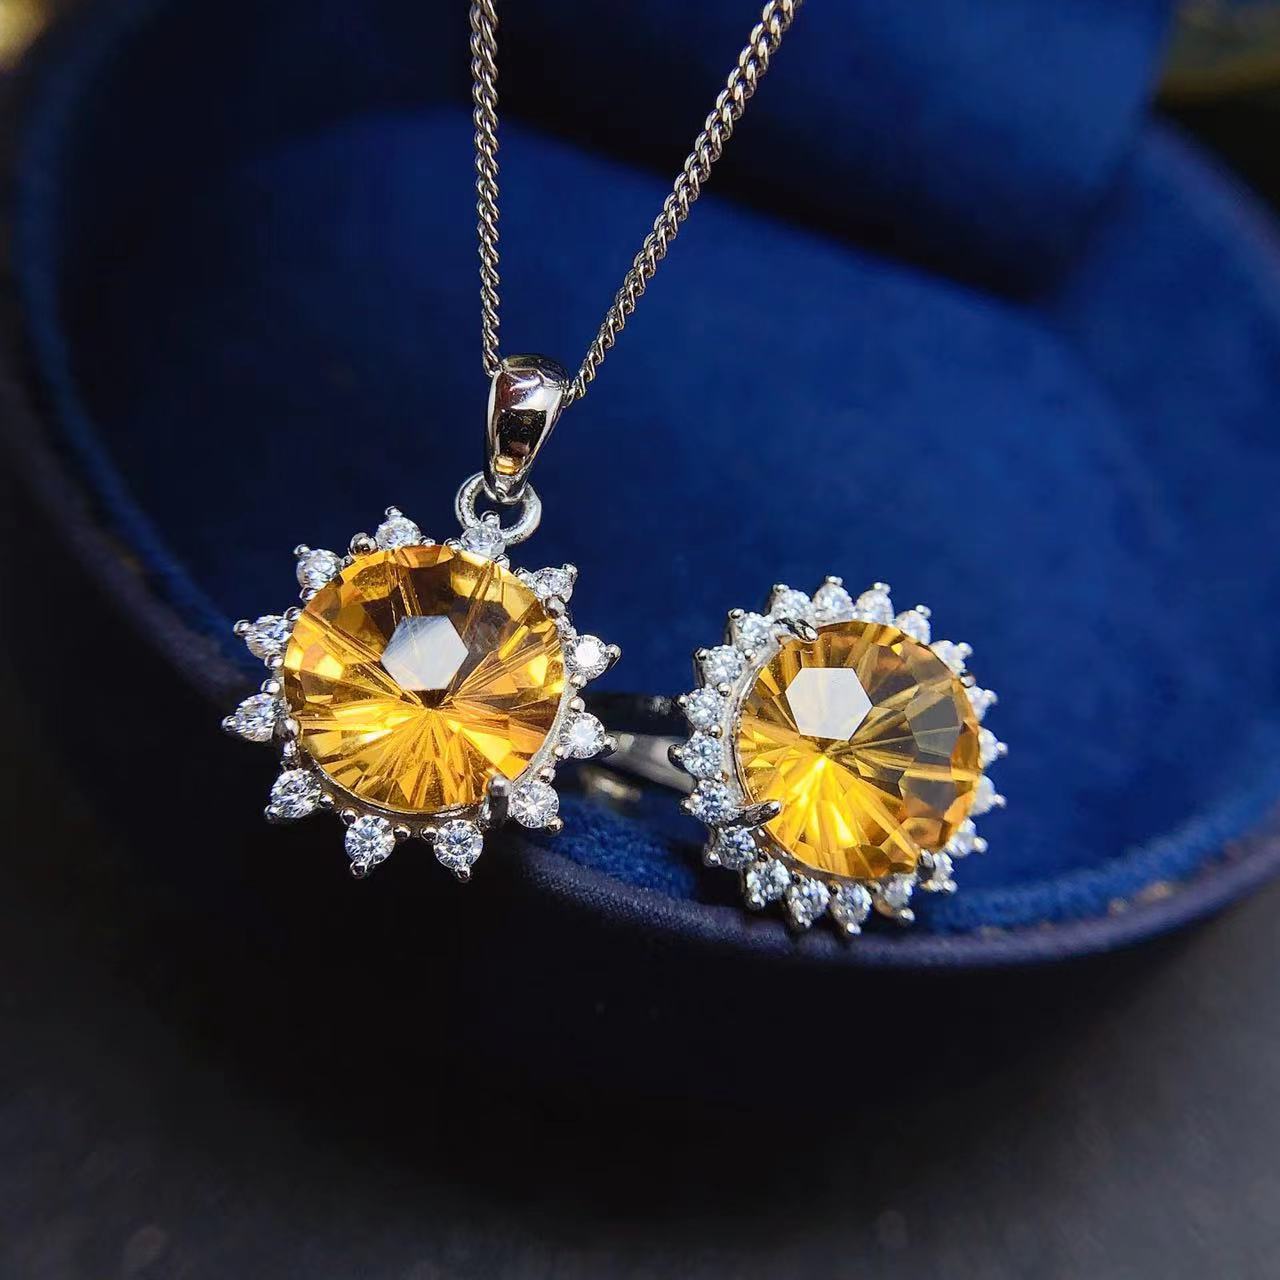 Women's Silver Jewelry Set with Natural Citrine - Perfect gift